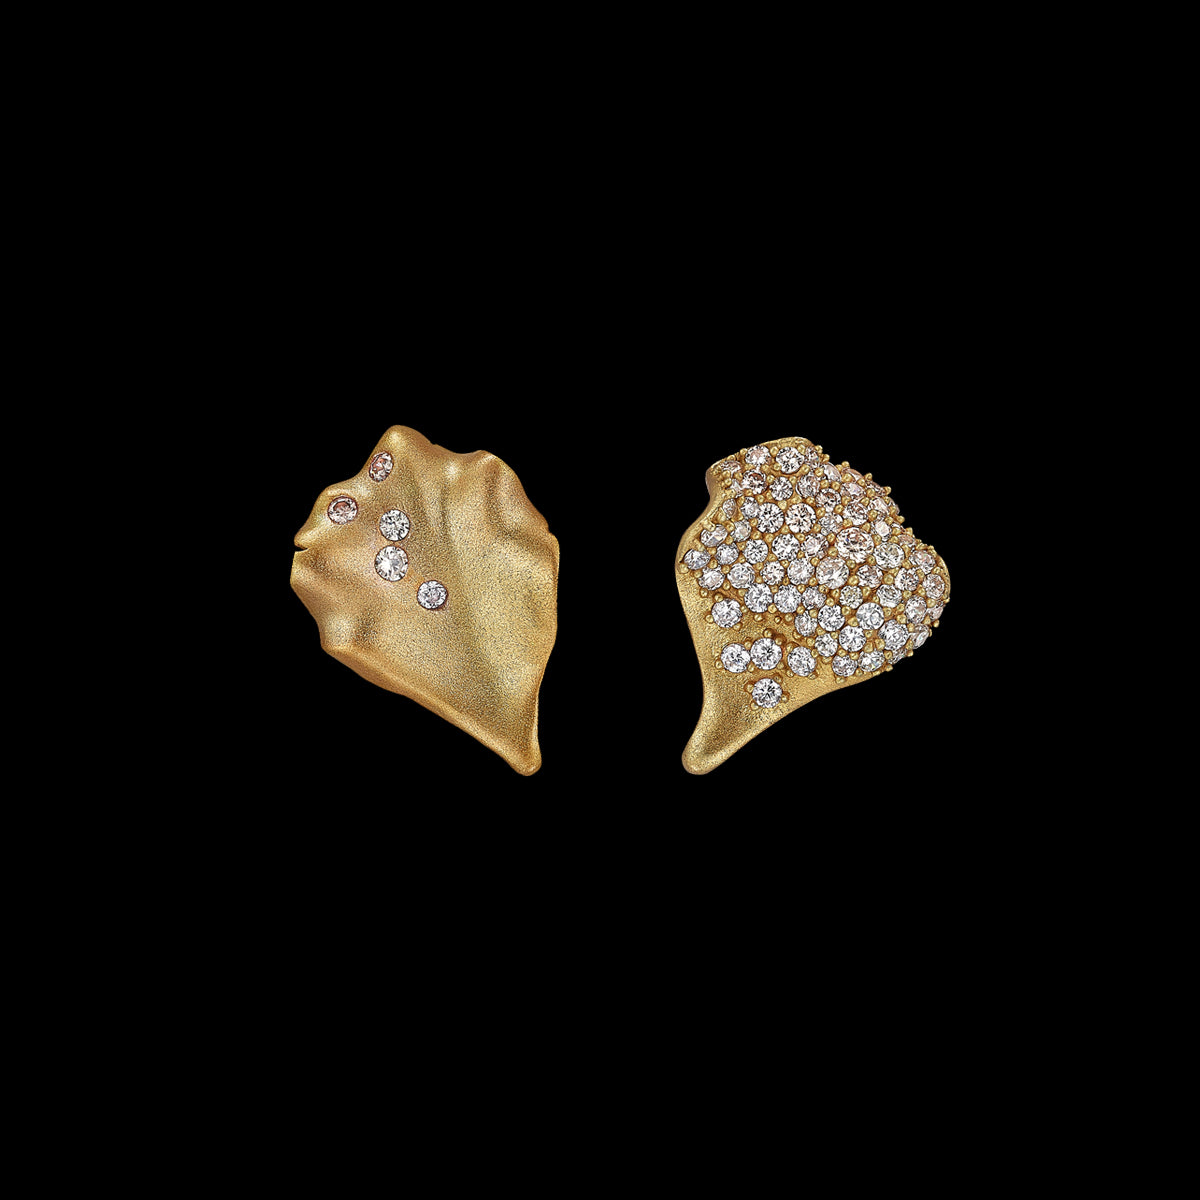 Gold Petal Studs, Earrings, Anabela Chan Joaillerie - Fine jewelry with laboratory grown and created gemstones hand-crafted in the United Kingdom. Anabela Chan Joaillerie is the first fine jewellery brand in the world to champion laboratory-grown and created gemstones with high jewellery design, artisanal craftsmanship and a focus on ethical and sustainable innovations.